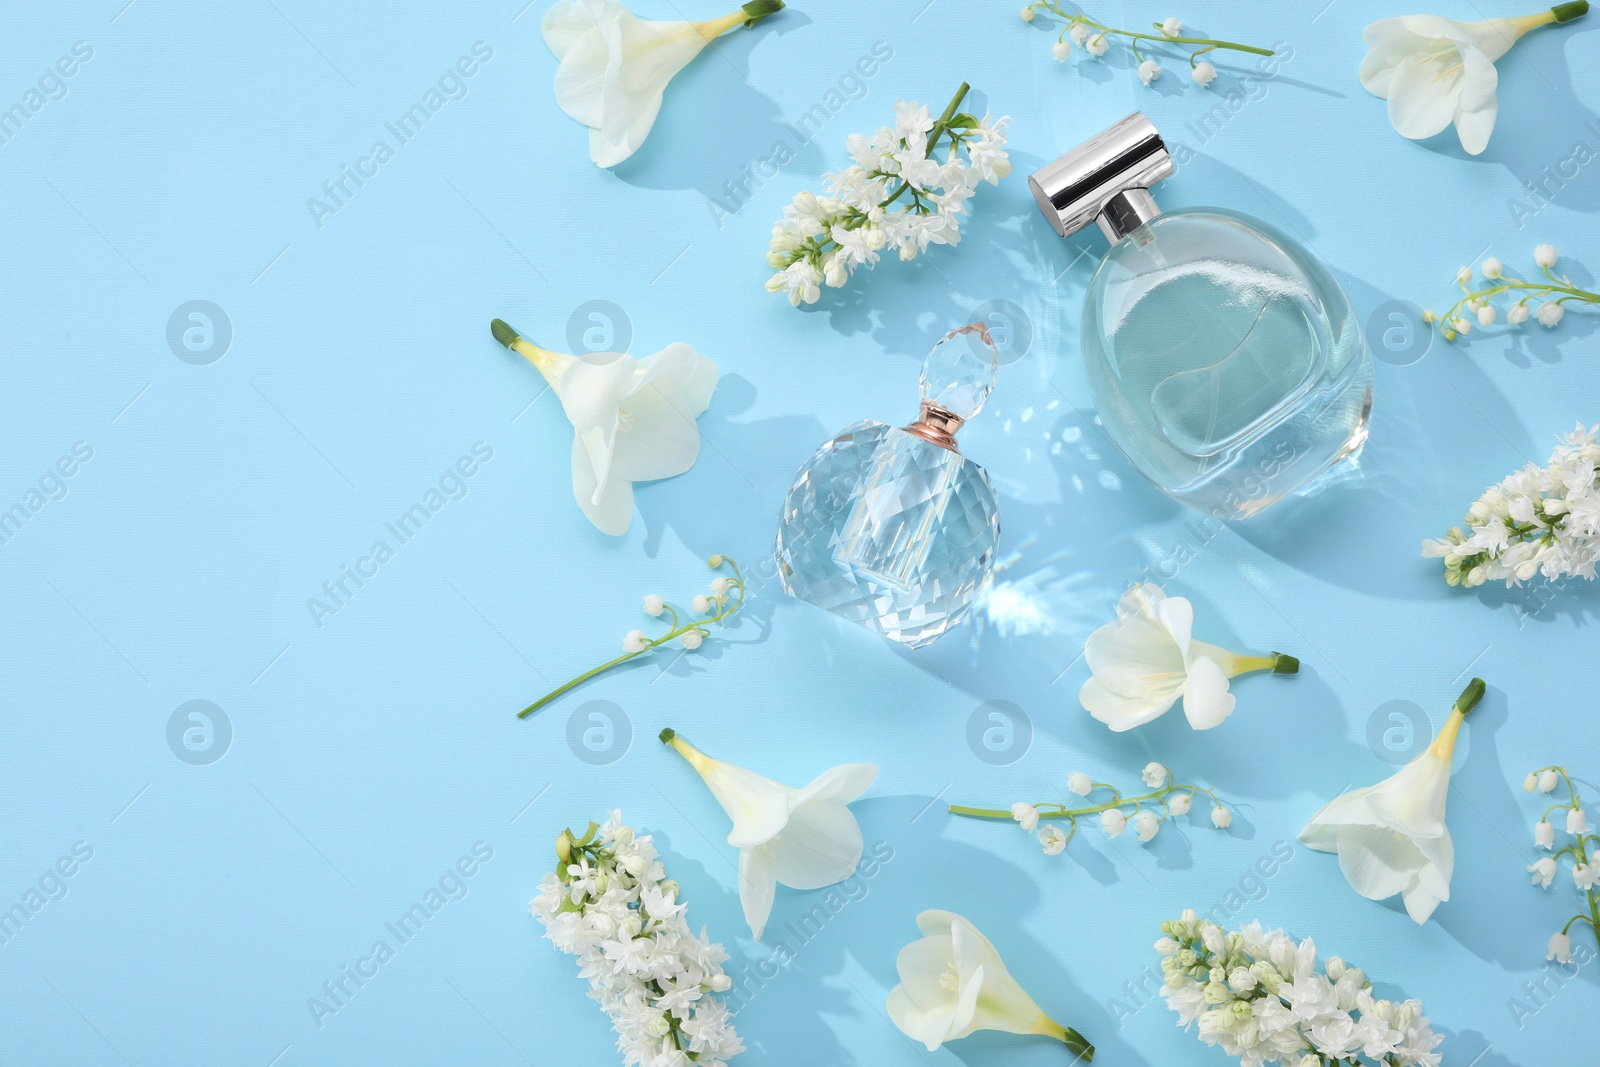 Photo of Luxury perfumes and floral decor on light blue background, flat lay. Space for text